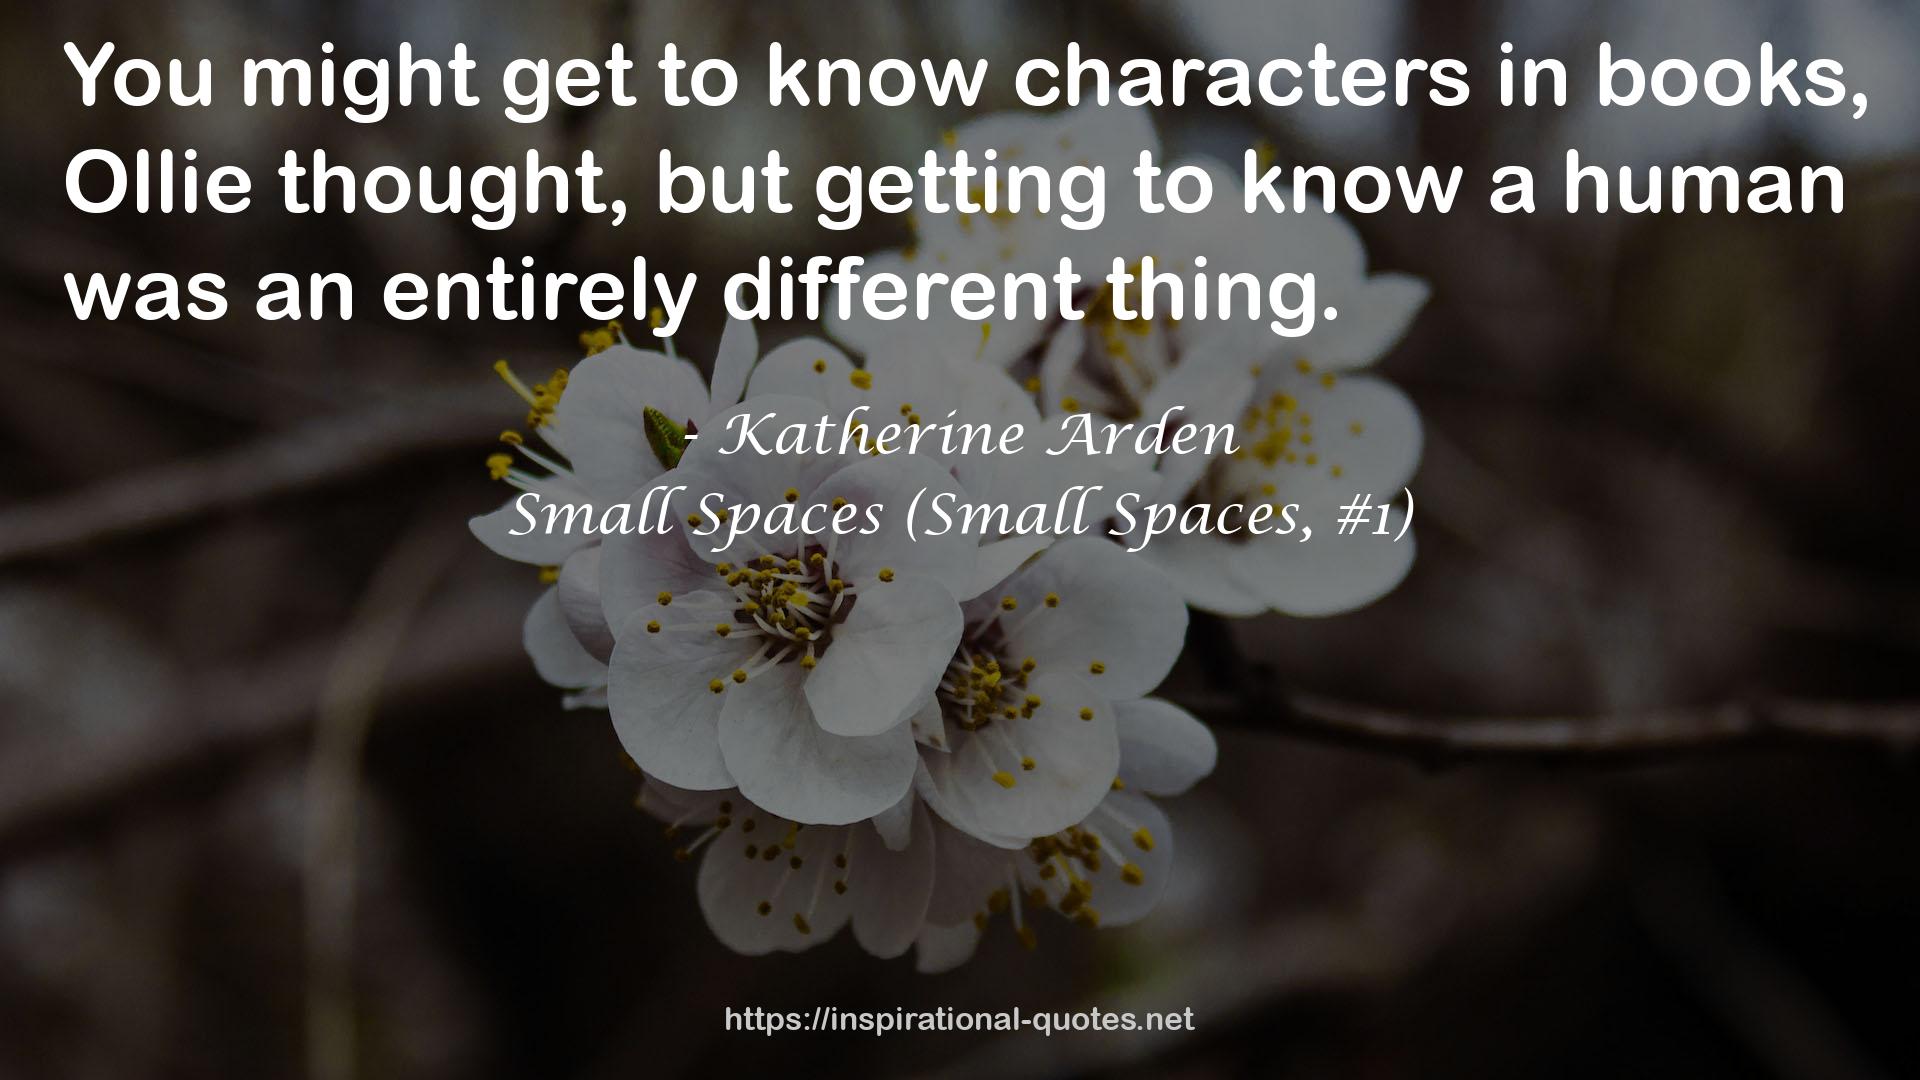 Small Spaces (Small Spaces, #1) QUOTES